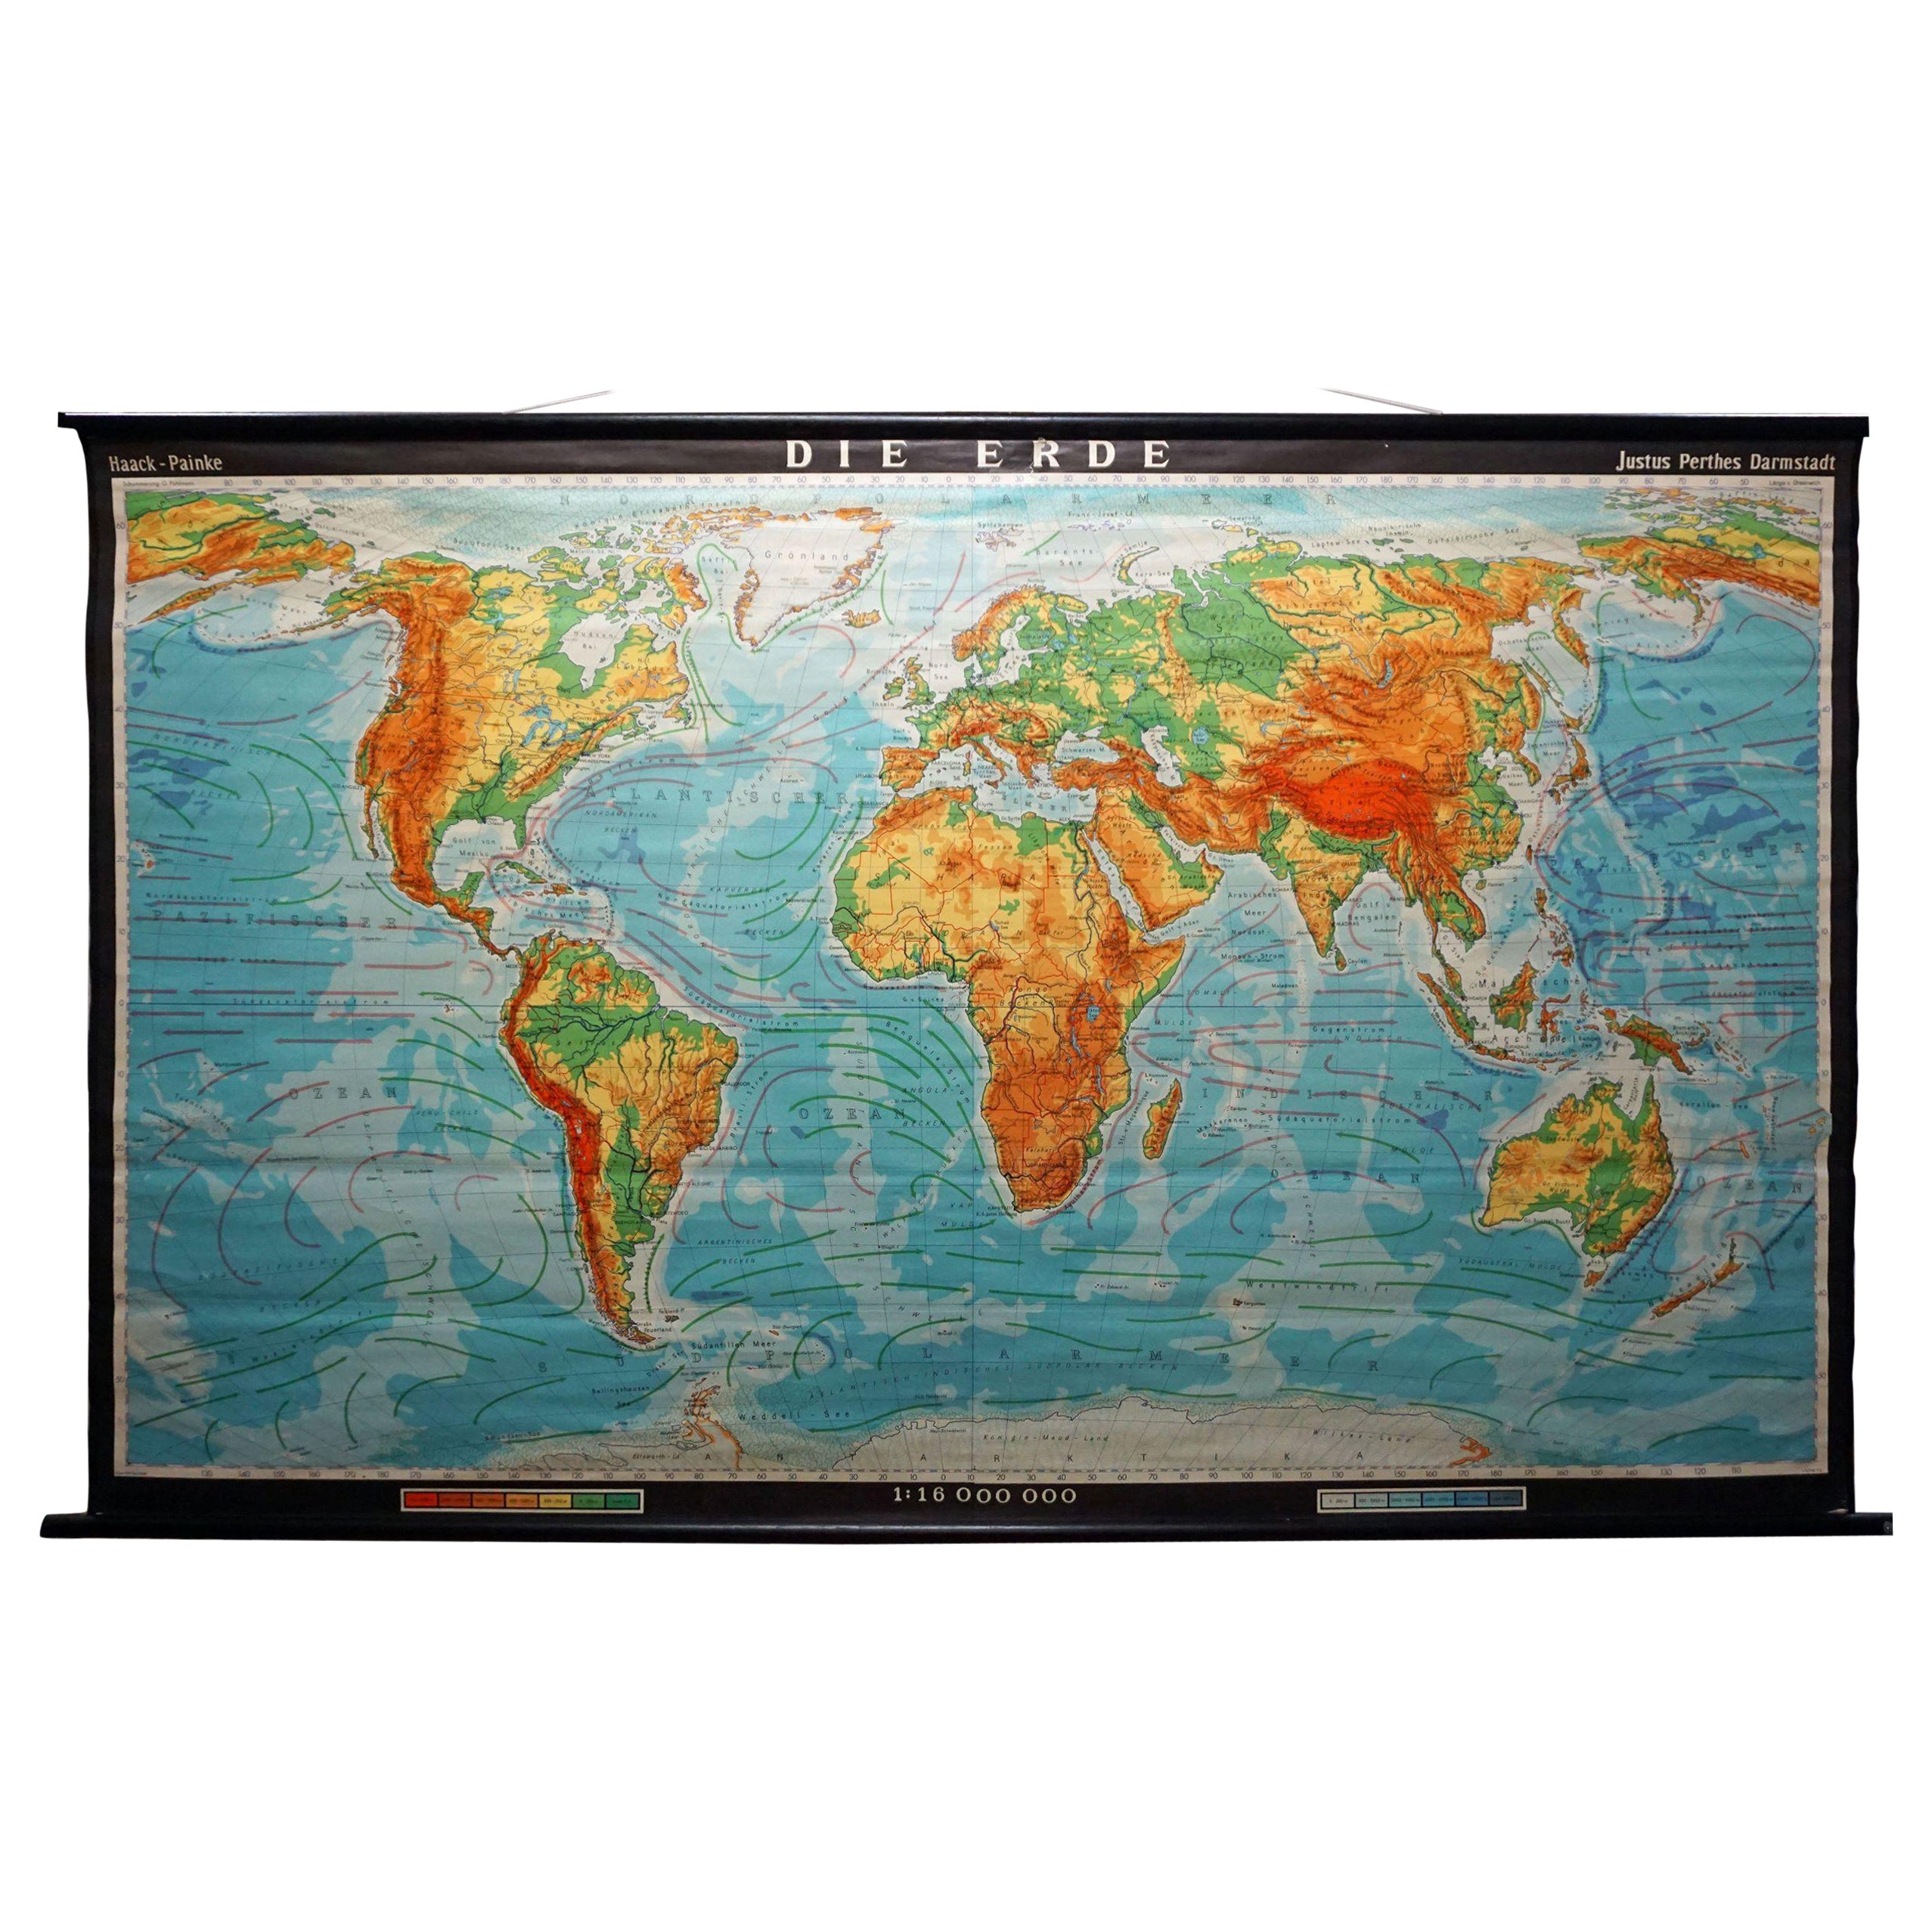 Vintage Mural World Map Earth Poster Pull-Down Wall Chart Poster Print